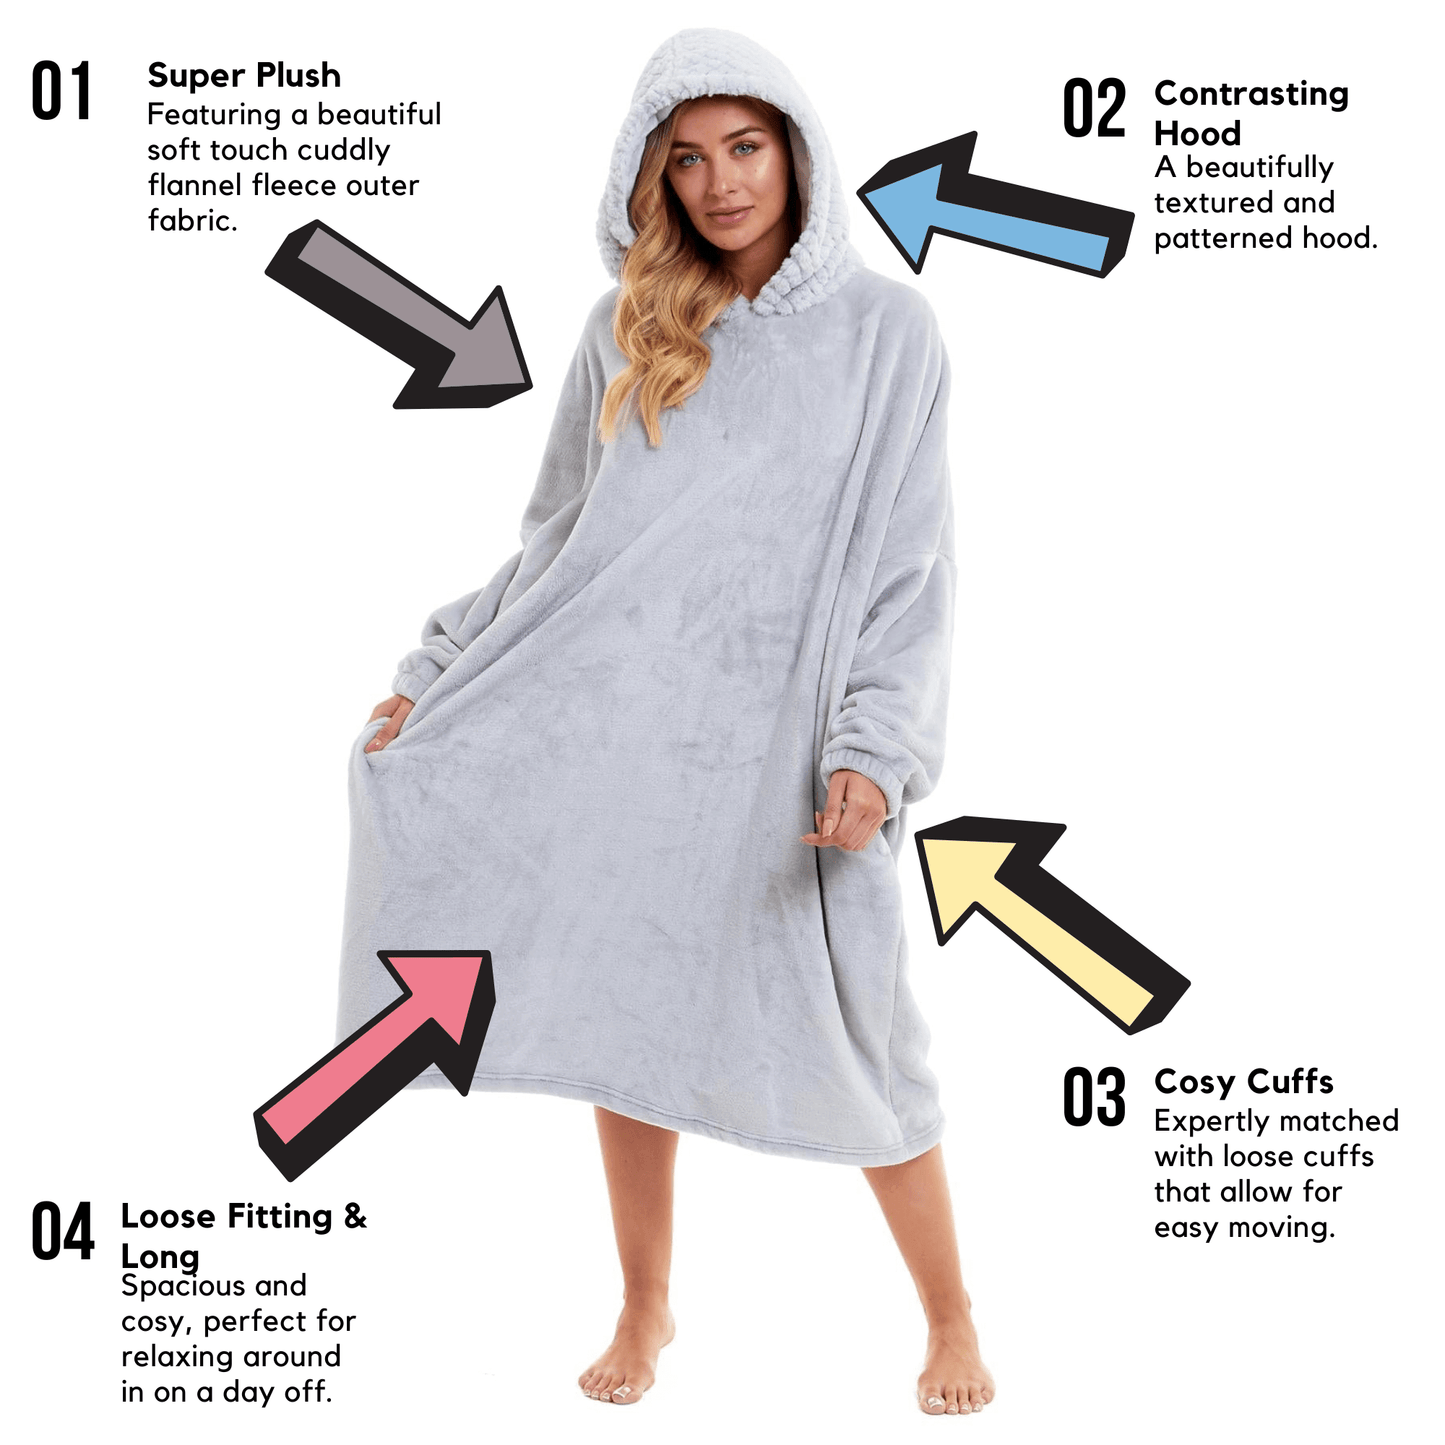 Women's Oversized Plush Hooded Poncho Blanket Cozy Fleece Hoodie with Fur Hood Ideal for Lounging Camping Outdoor Warmth by Daisy Dreamer. Buy now for £21.00. A Hooded Blanket by Daisy Dreamer. _Hi_chtgptapp_optimised_this_description-generator,_Hi_chtgpt